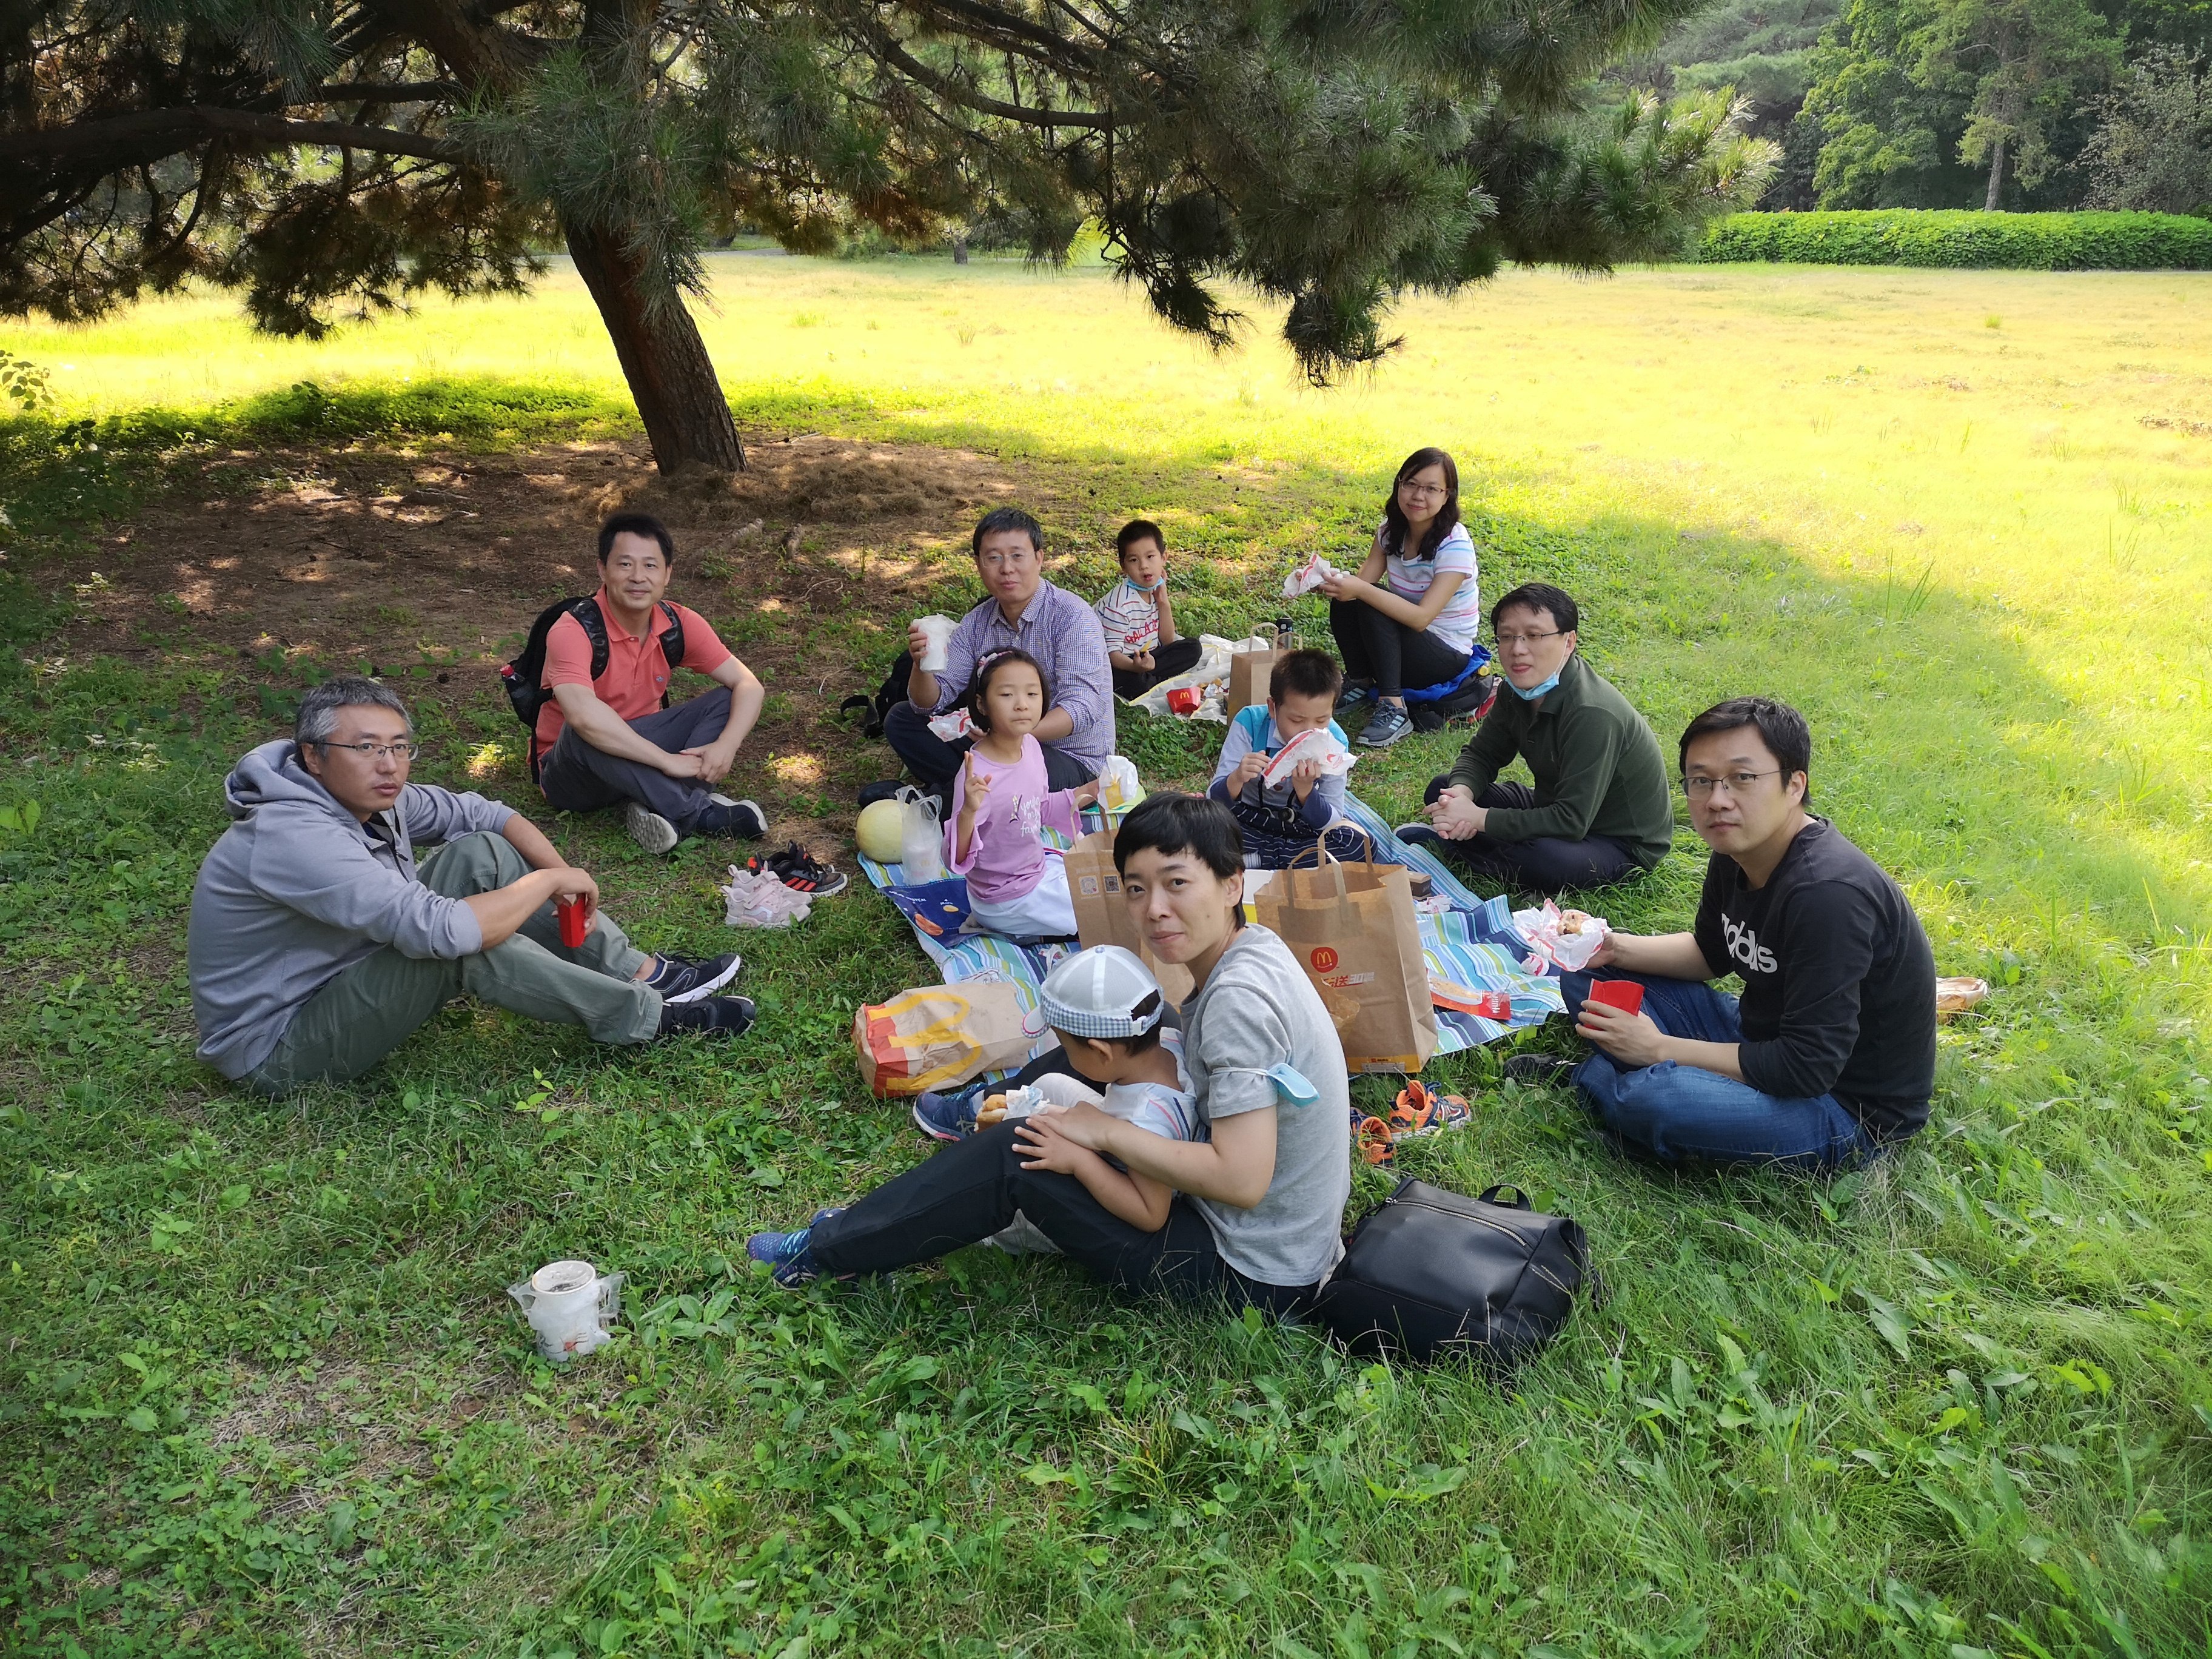 Some of the young scientists who founded The Innovation science journal in China enjoy a day out with their families. Photo: Handout